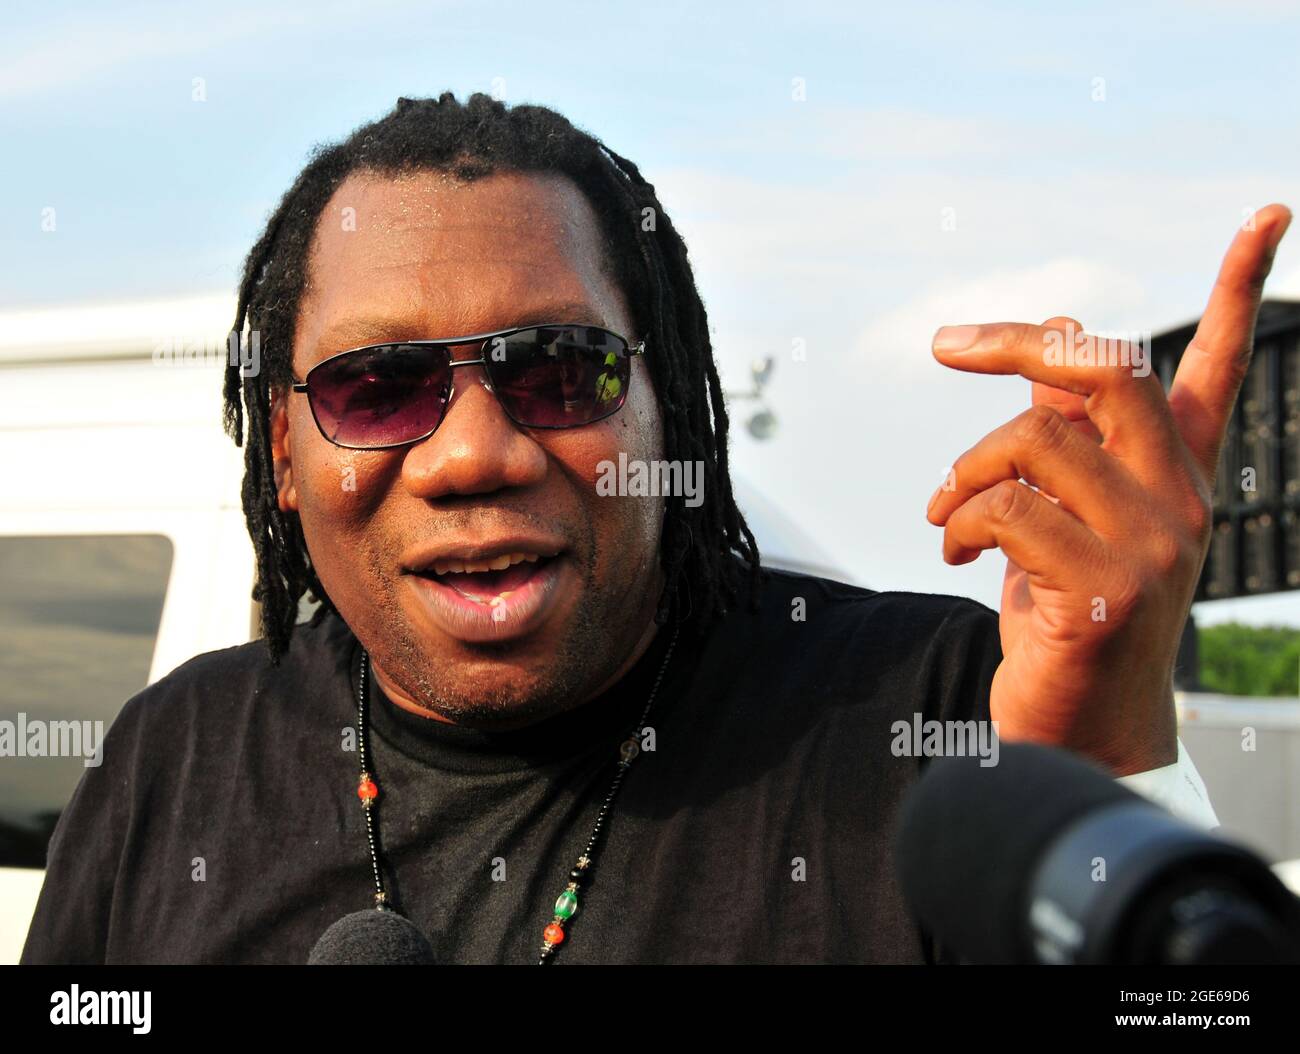 Bronx, NY, USA. 16th Aug, 2021. KRS-One performs at the 'It's Time for Hip Hop in NYC' concert at Orchard Beach on August 16, 2021 in the Bronx, New York. Credit: Koi Sojer/Snap'n U Photos/Media Punch/Alamy Live News Stock Photo